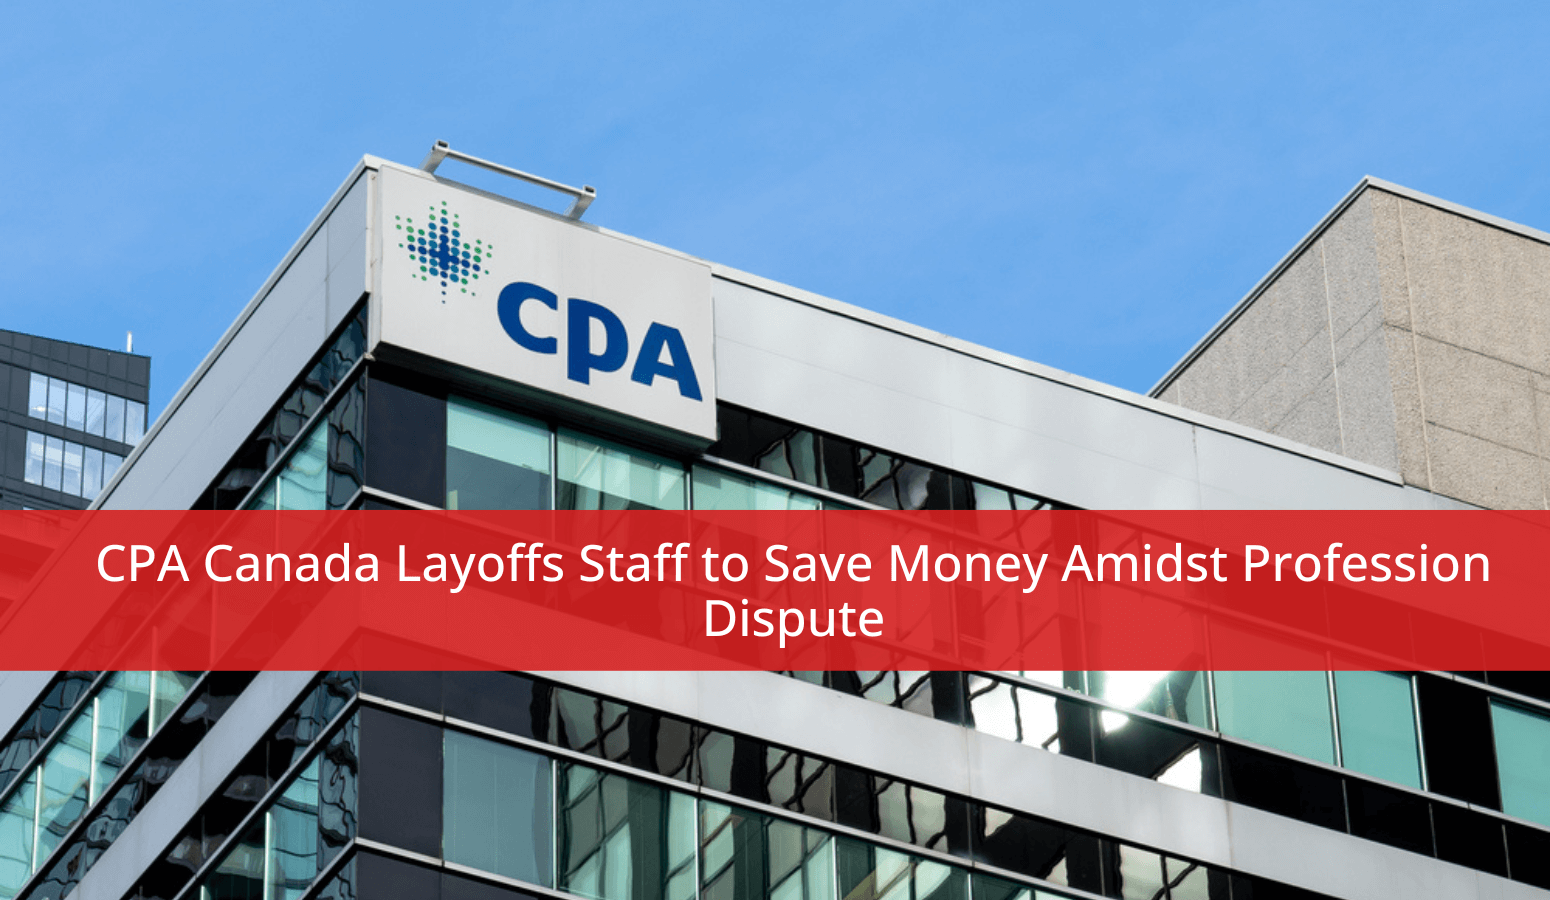 Featured image for “CPA Canada layoffs Staff to Save Money Amidst Profession Dispute”